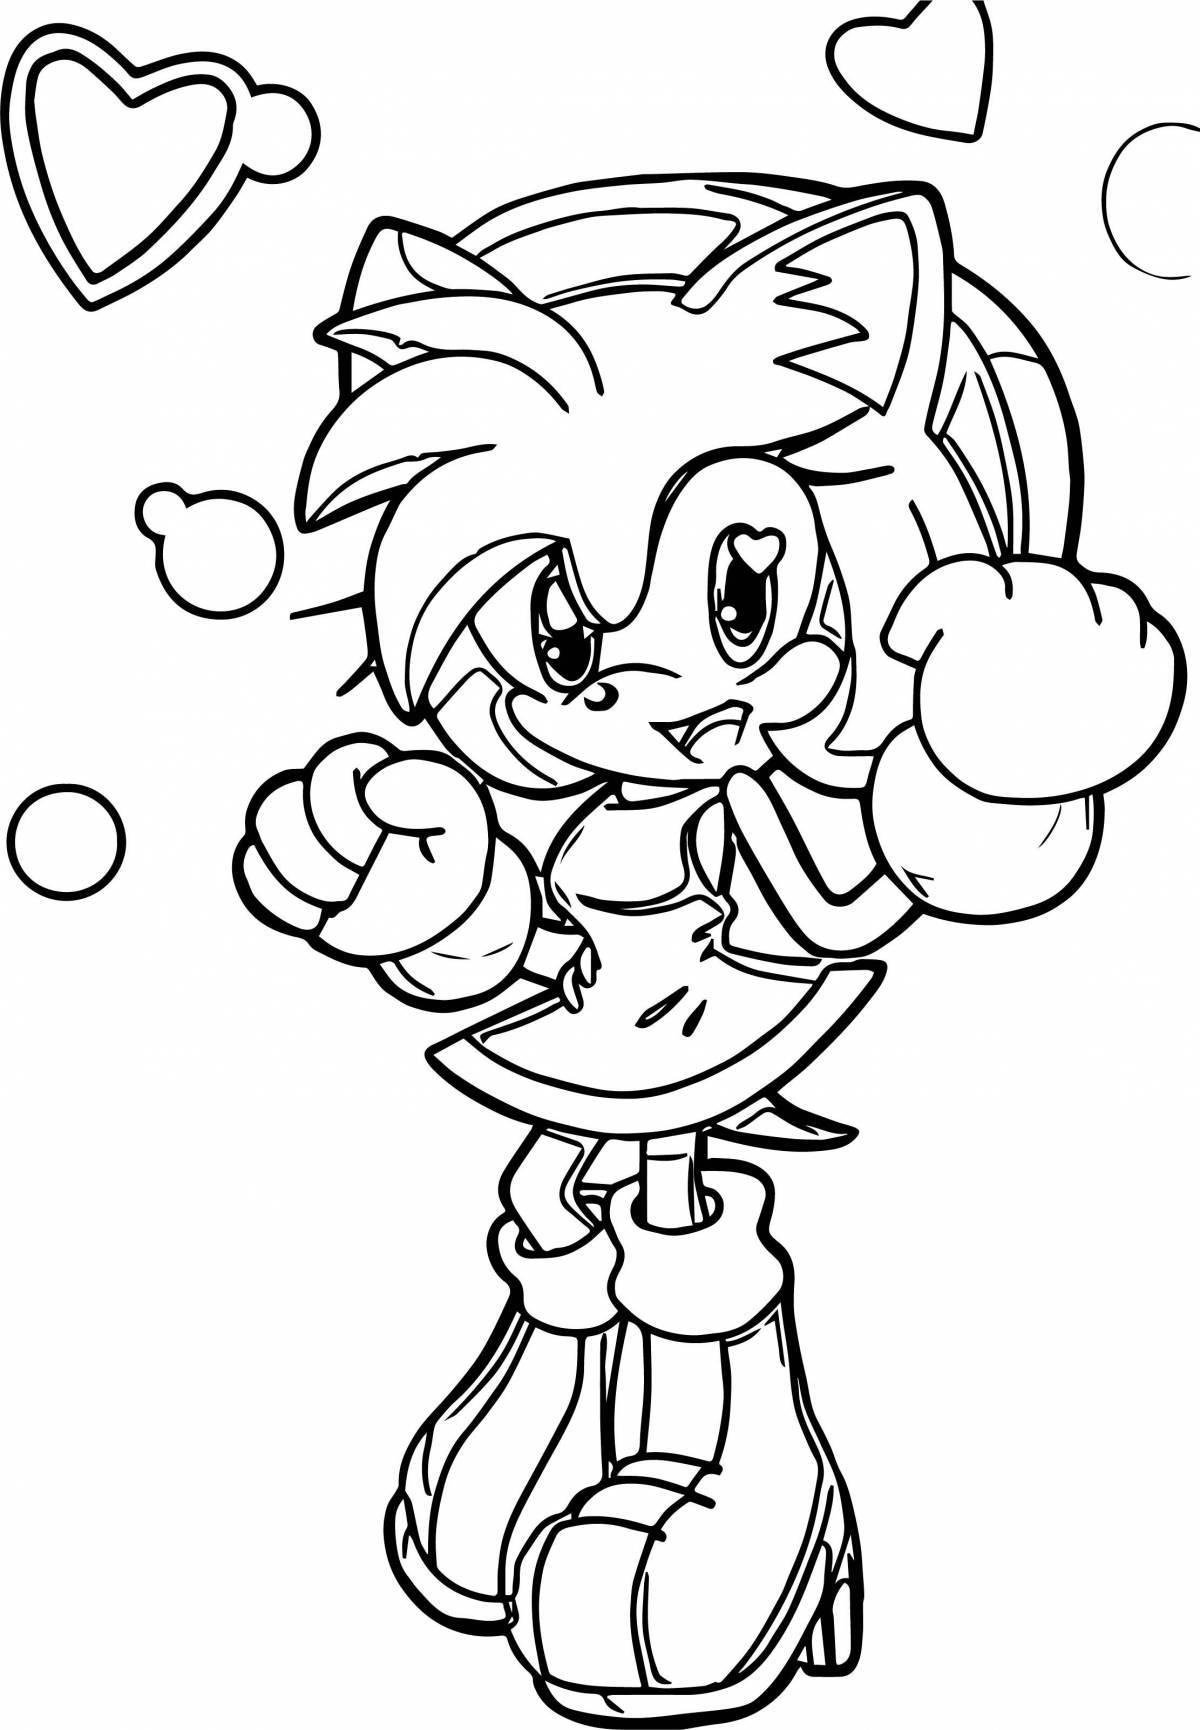 Amy rose coloring page exploded with color